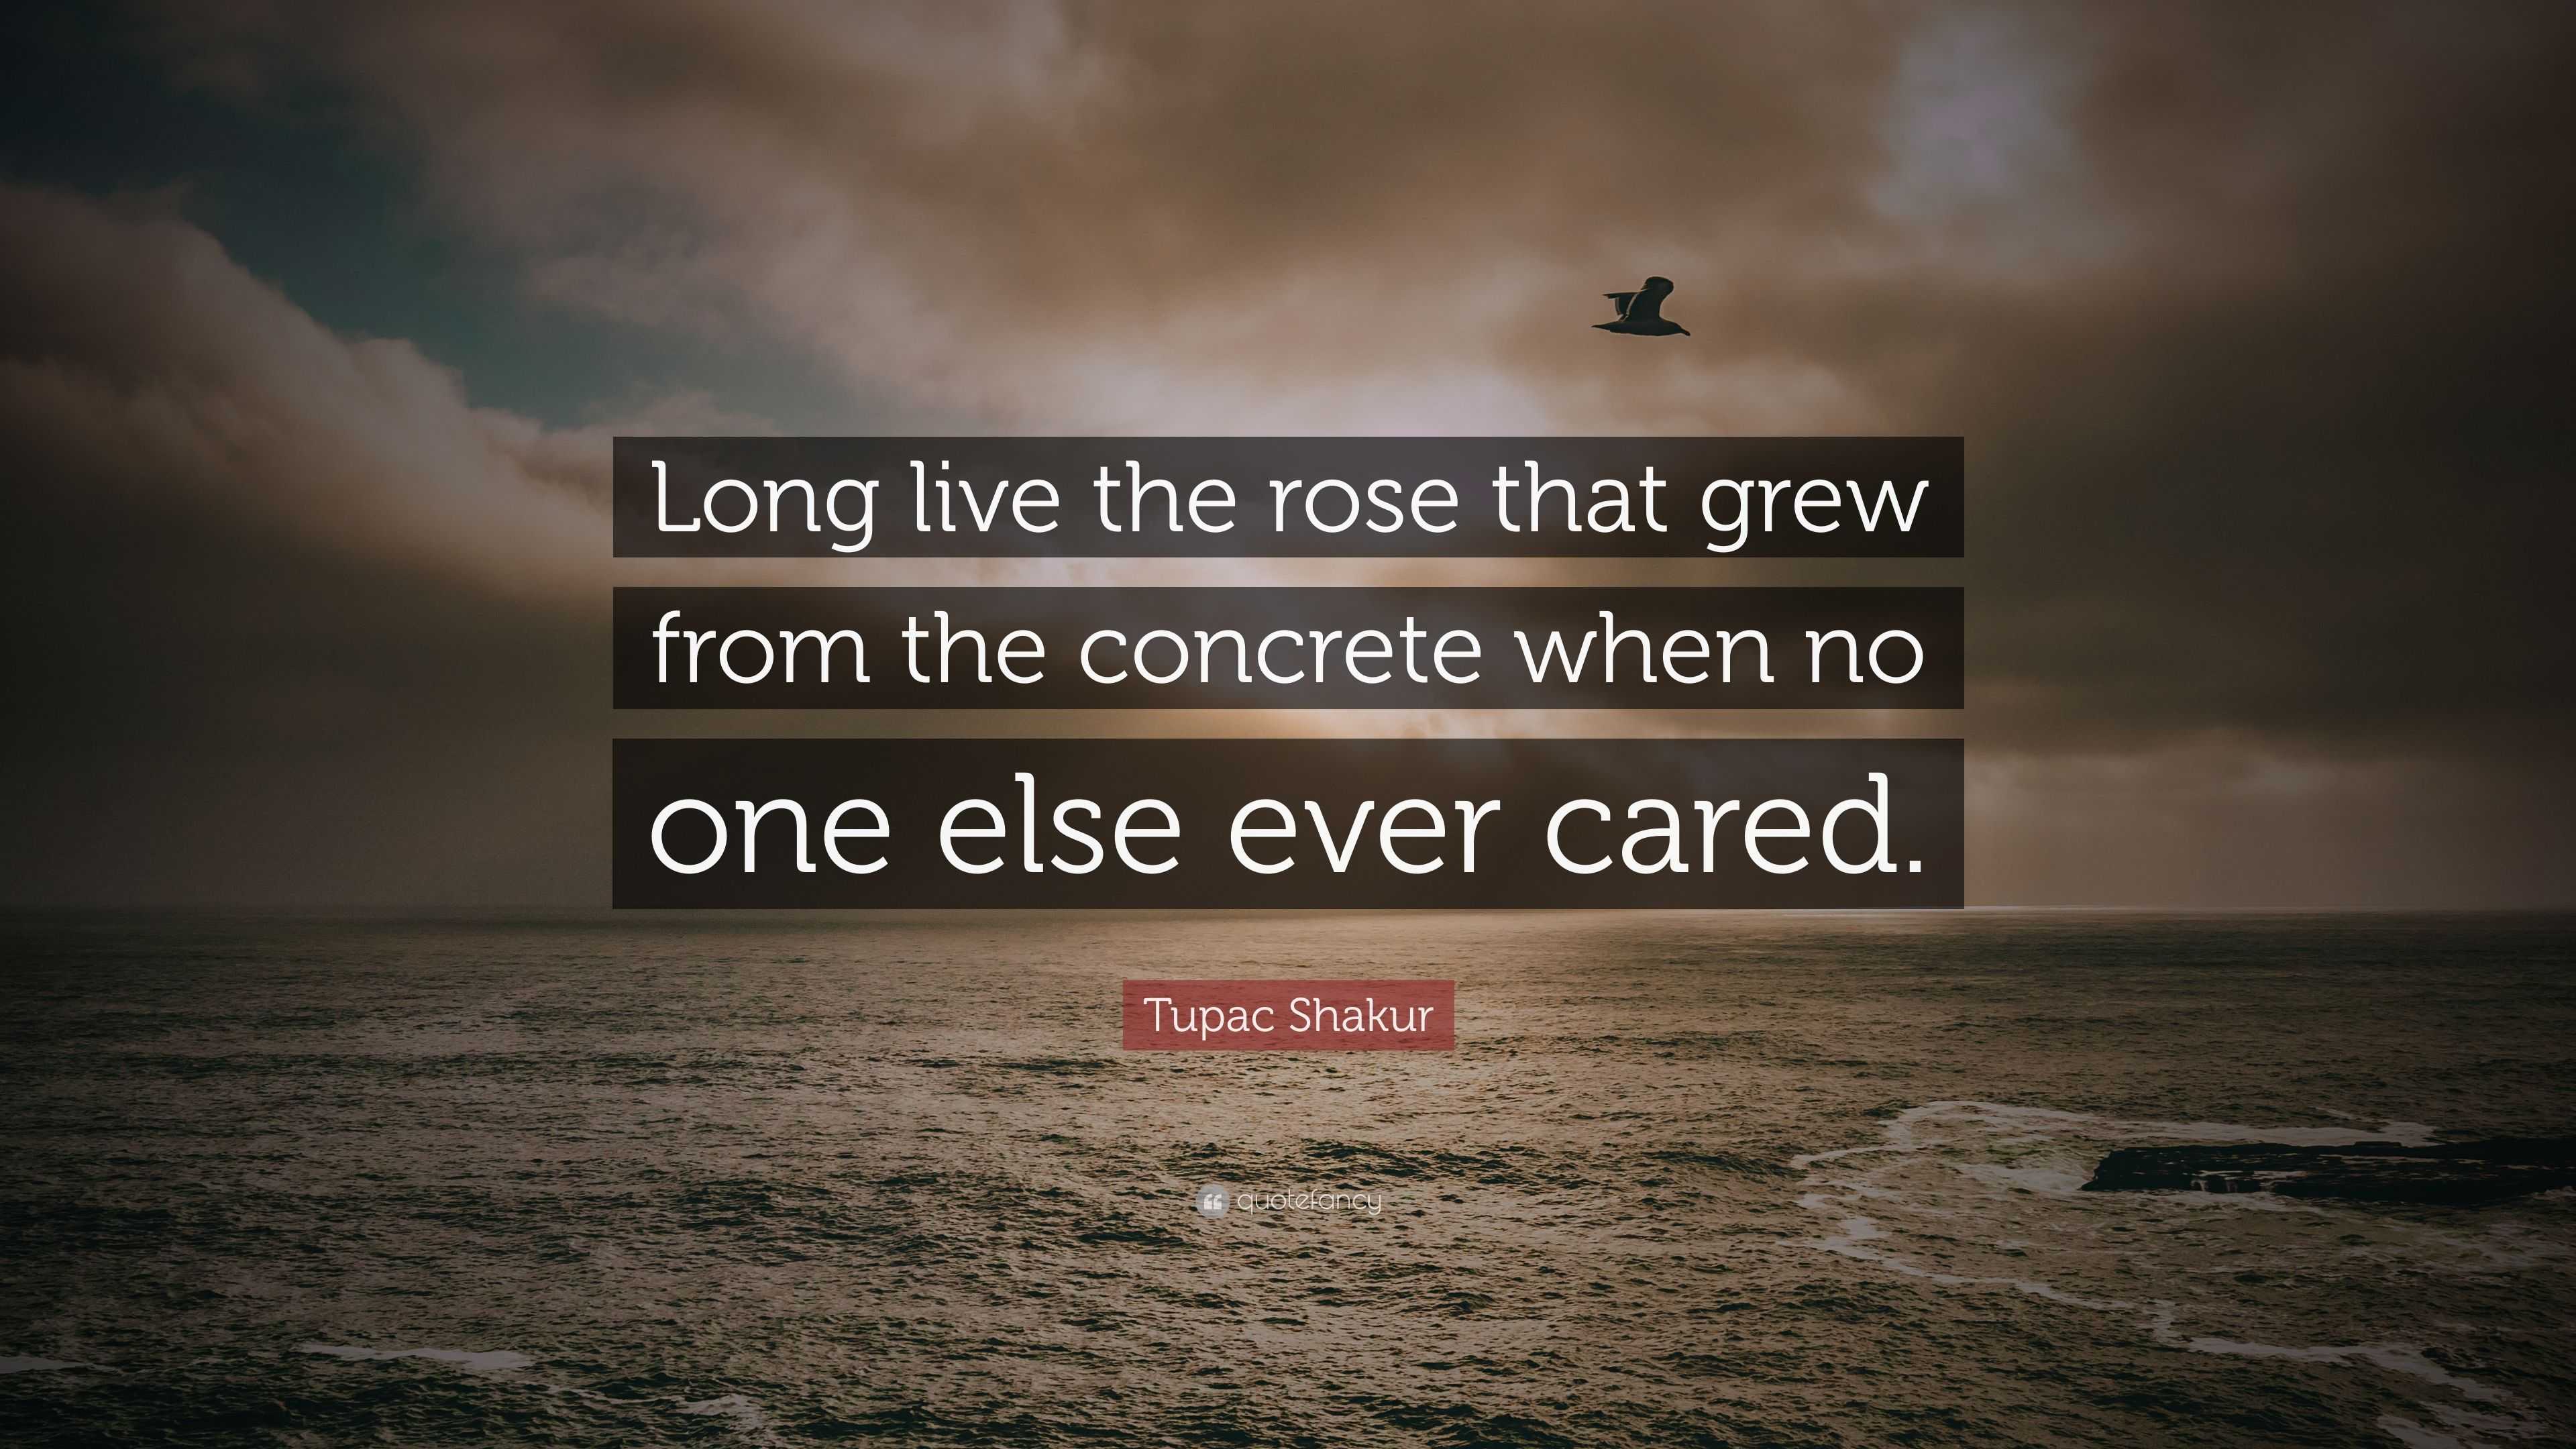 Tupac Shakur Quote: “Long live the rose that grew from the concrete